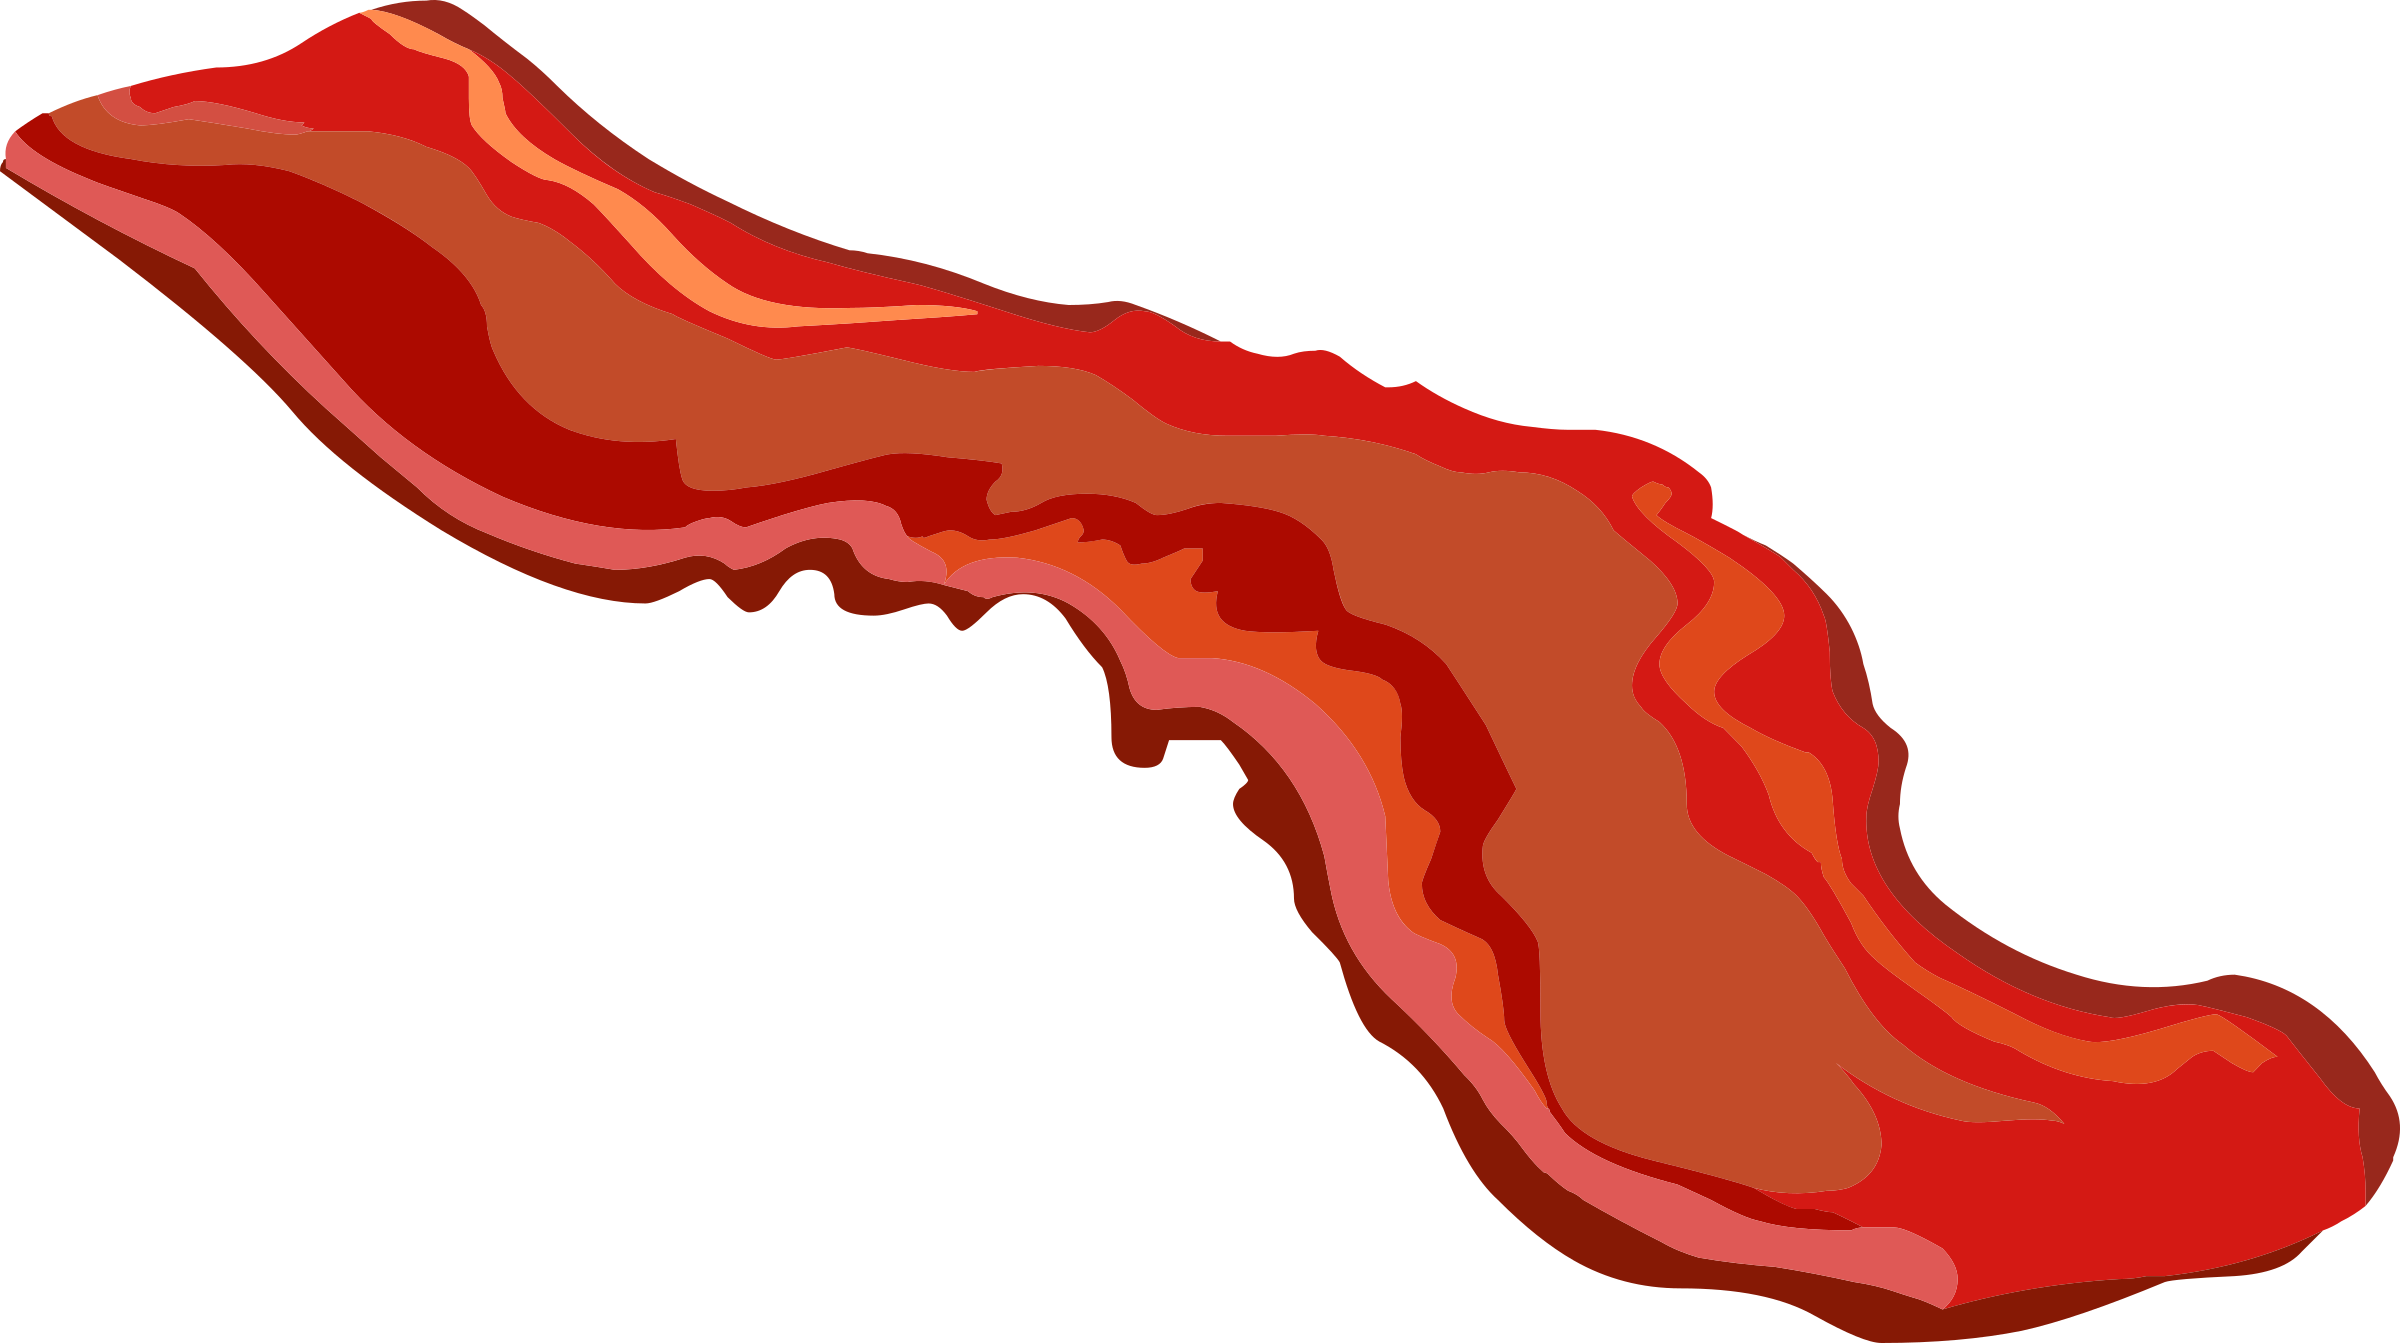 Bacon Transparent PNG Pictures - Free Icons and PNG Backgrounds